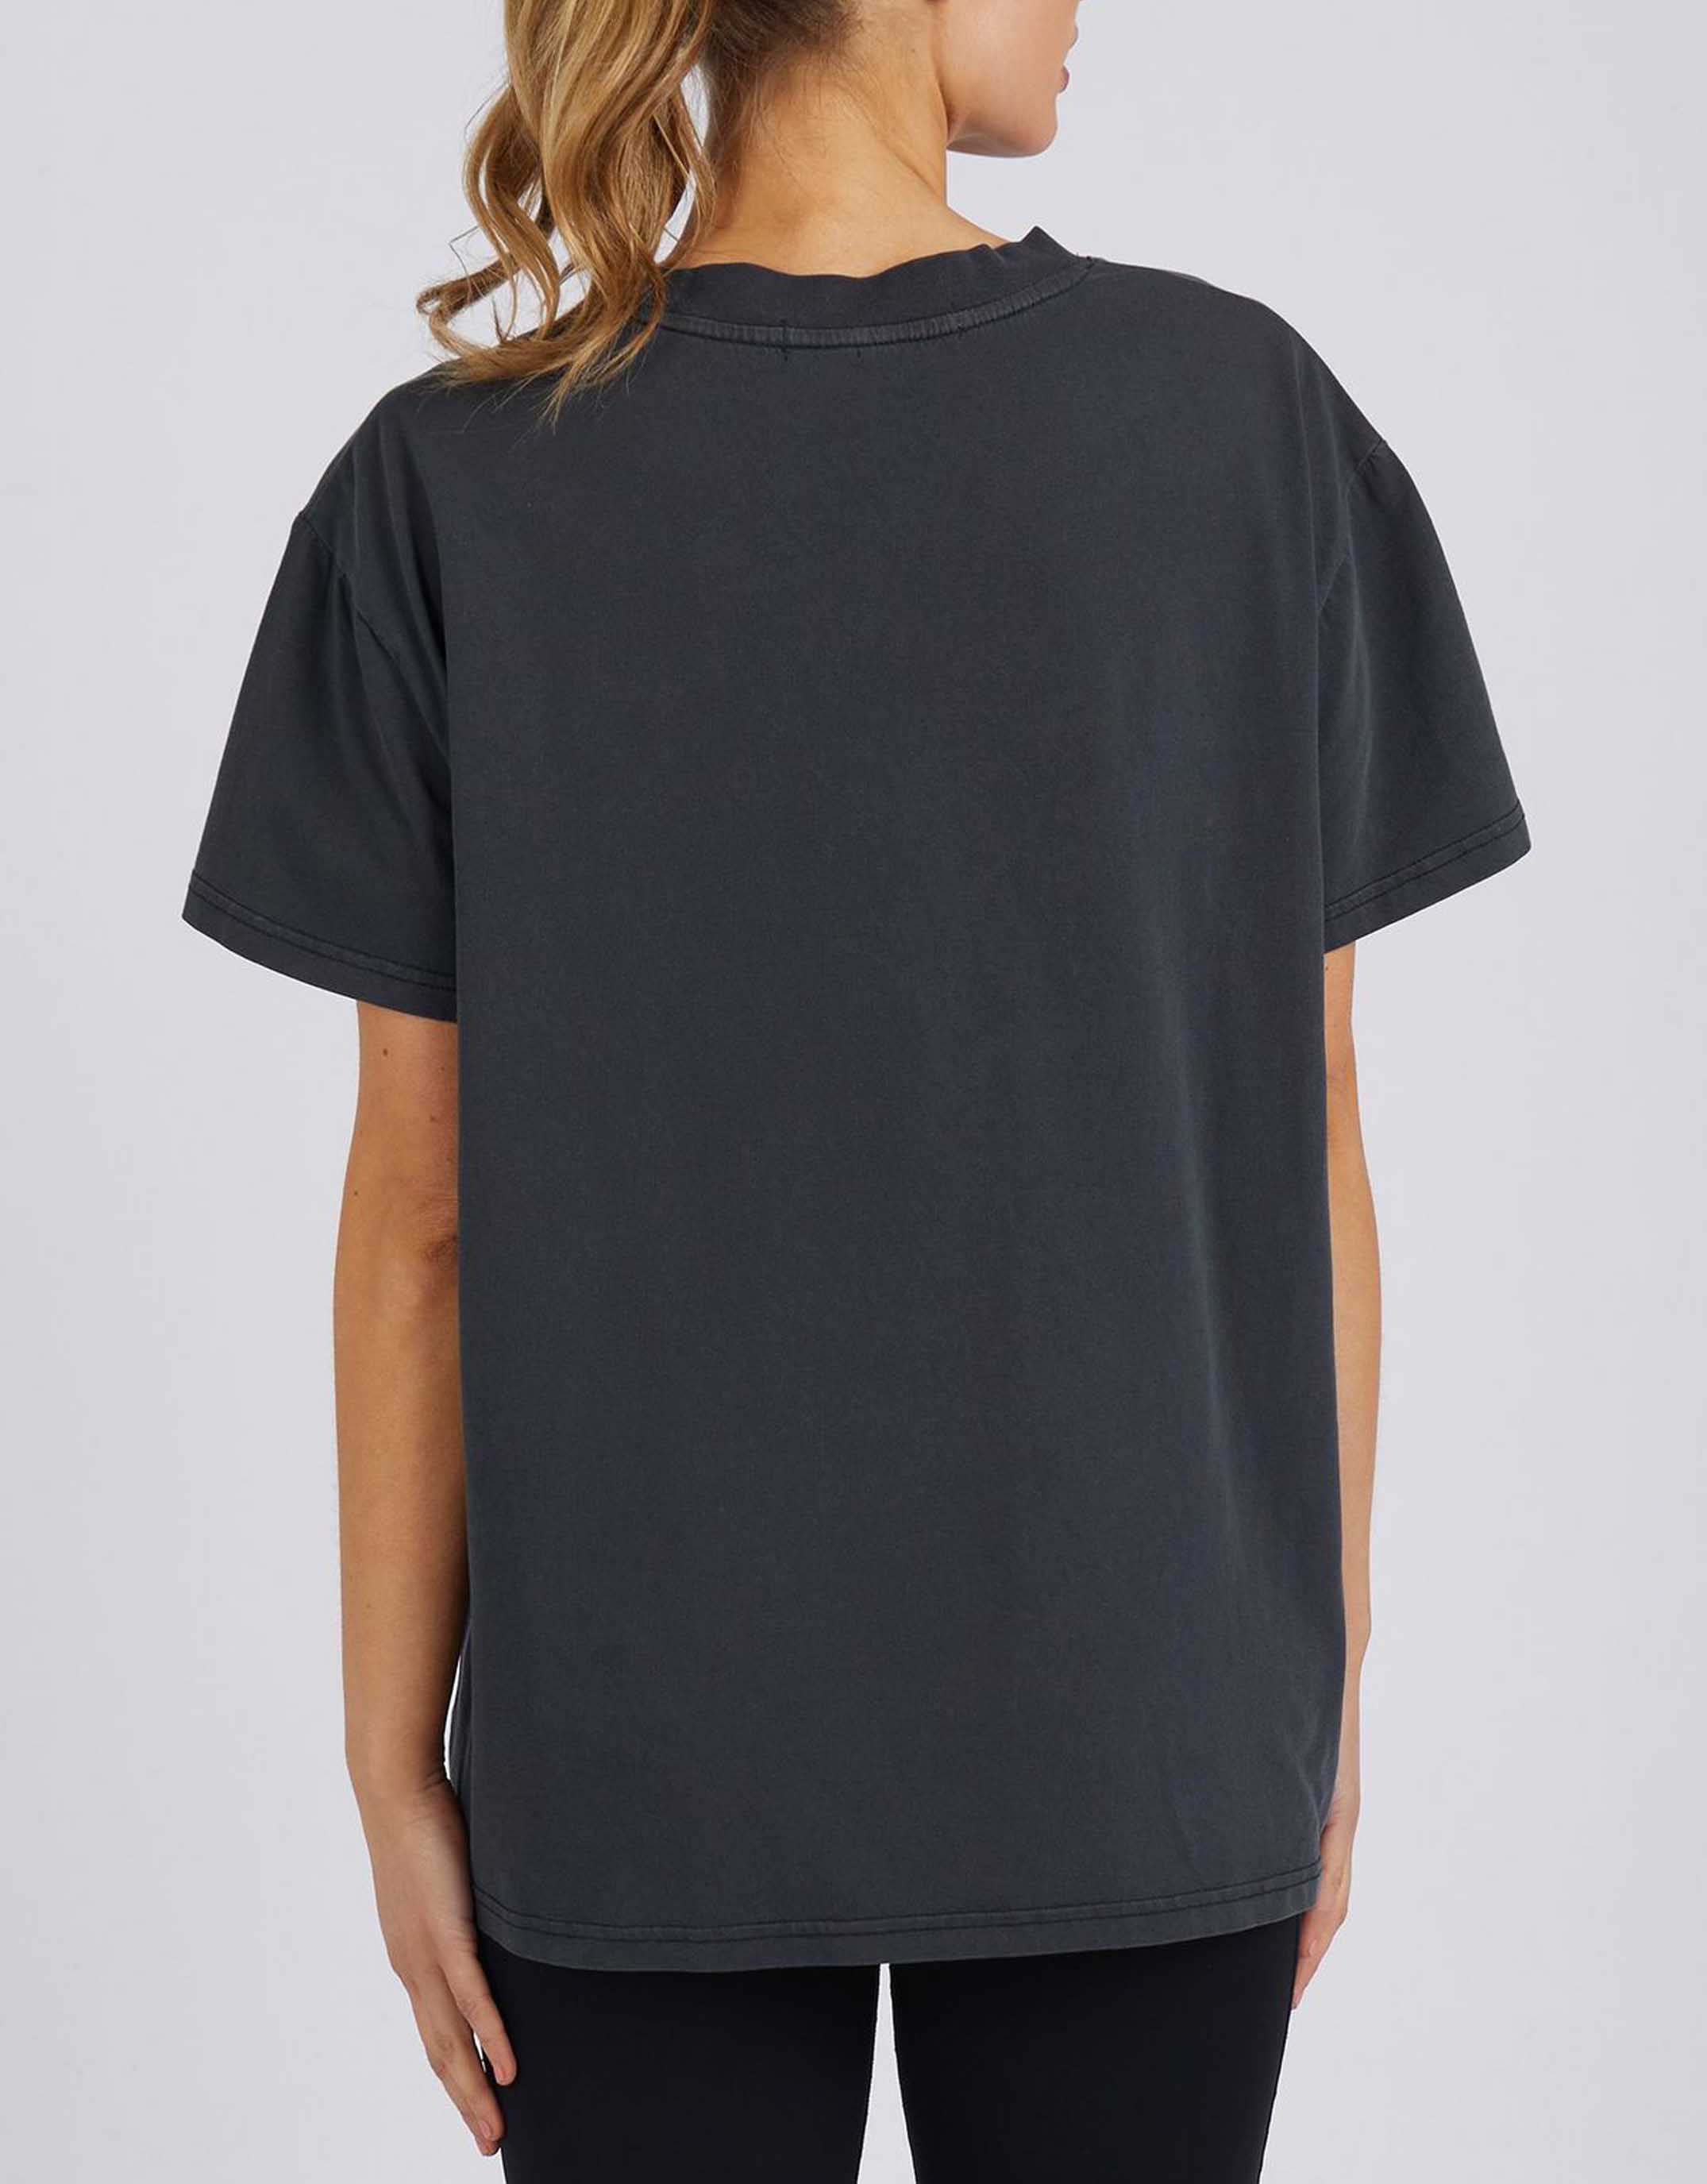 foxwood-glider-tee-washed-black-womens-clothing